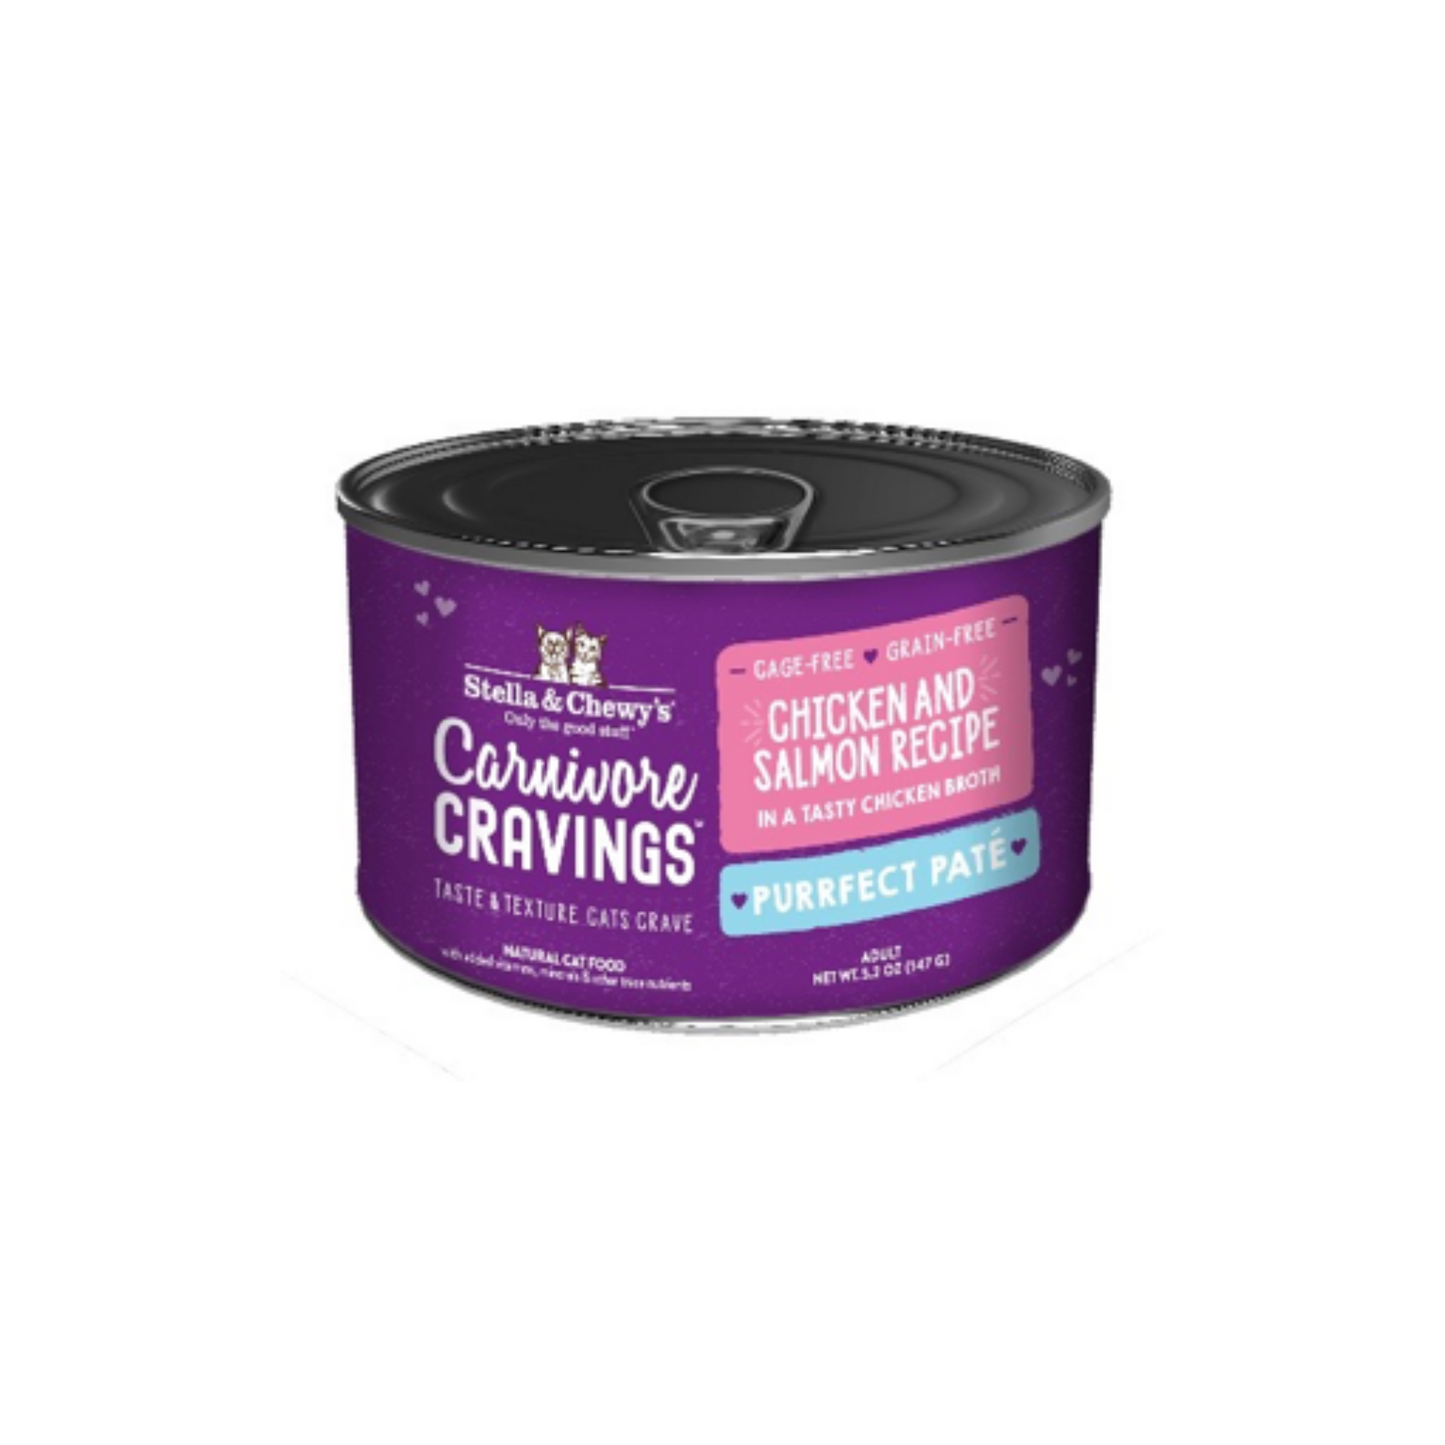 Stella & Chewy's Carnivore Cravings-Purrfect Pate Chicken & Salmon Pate Recipe in Broth Cat Food 5.2oz